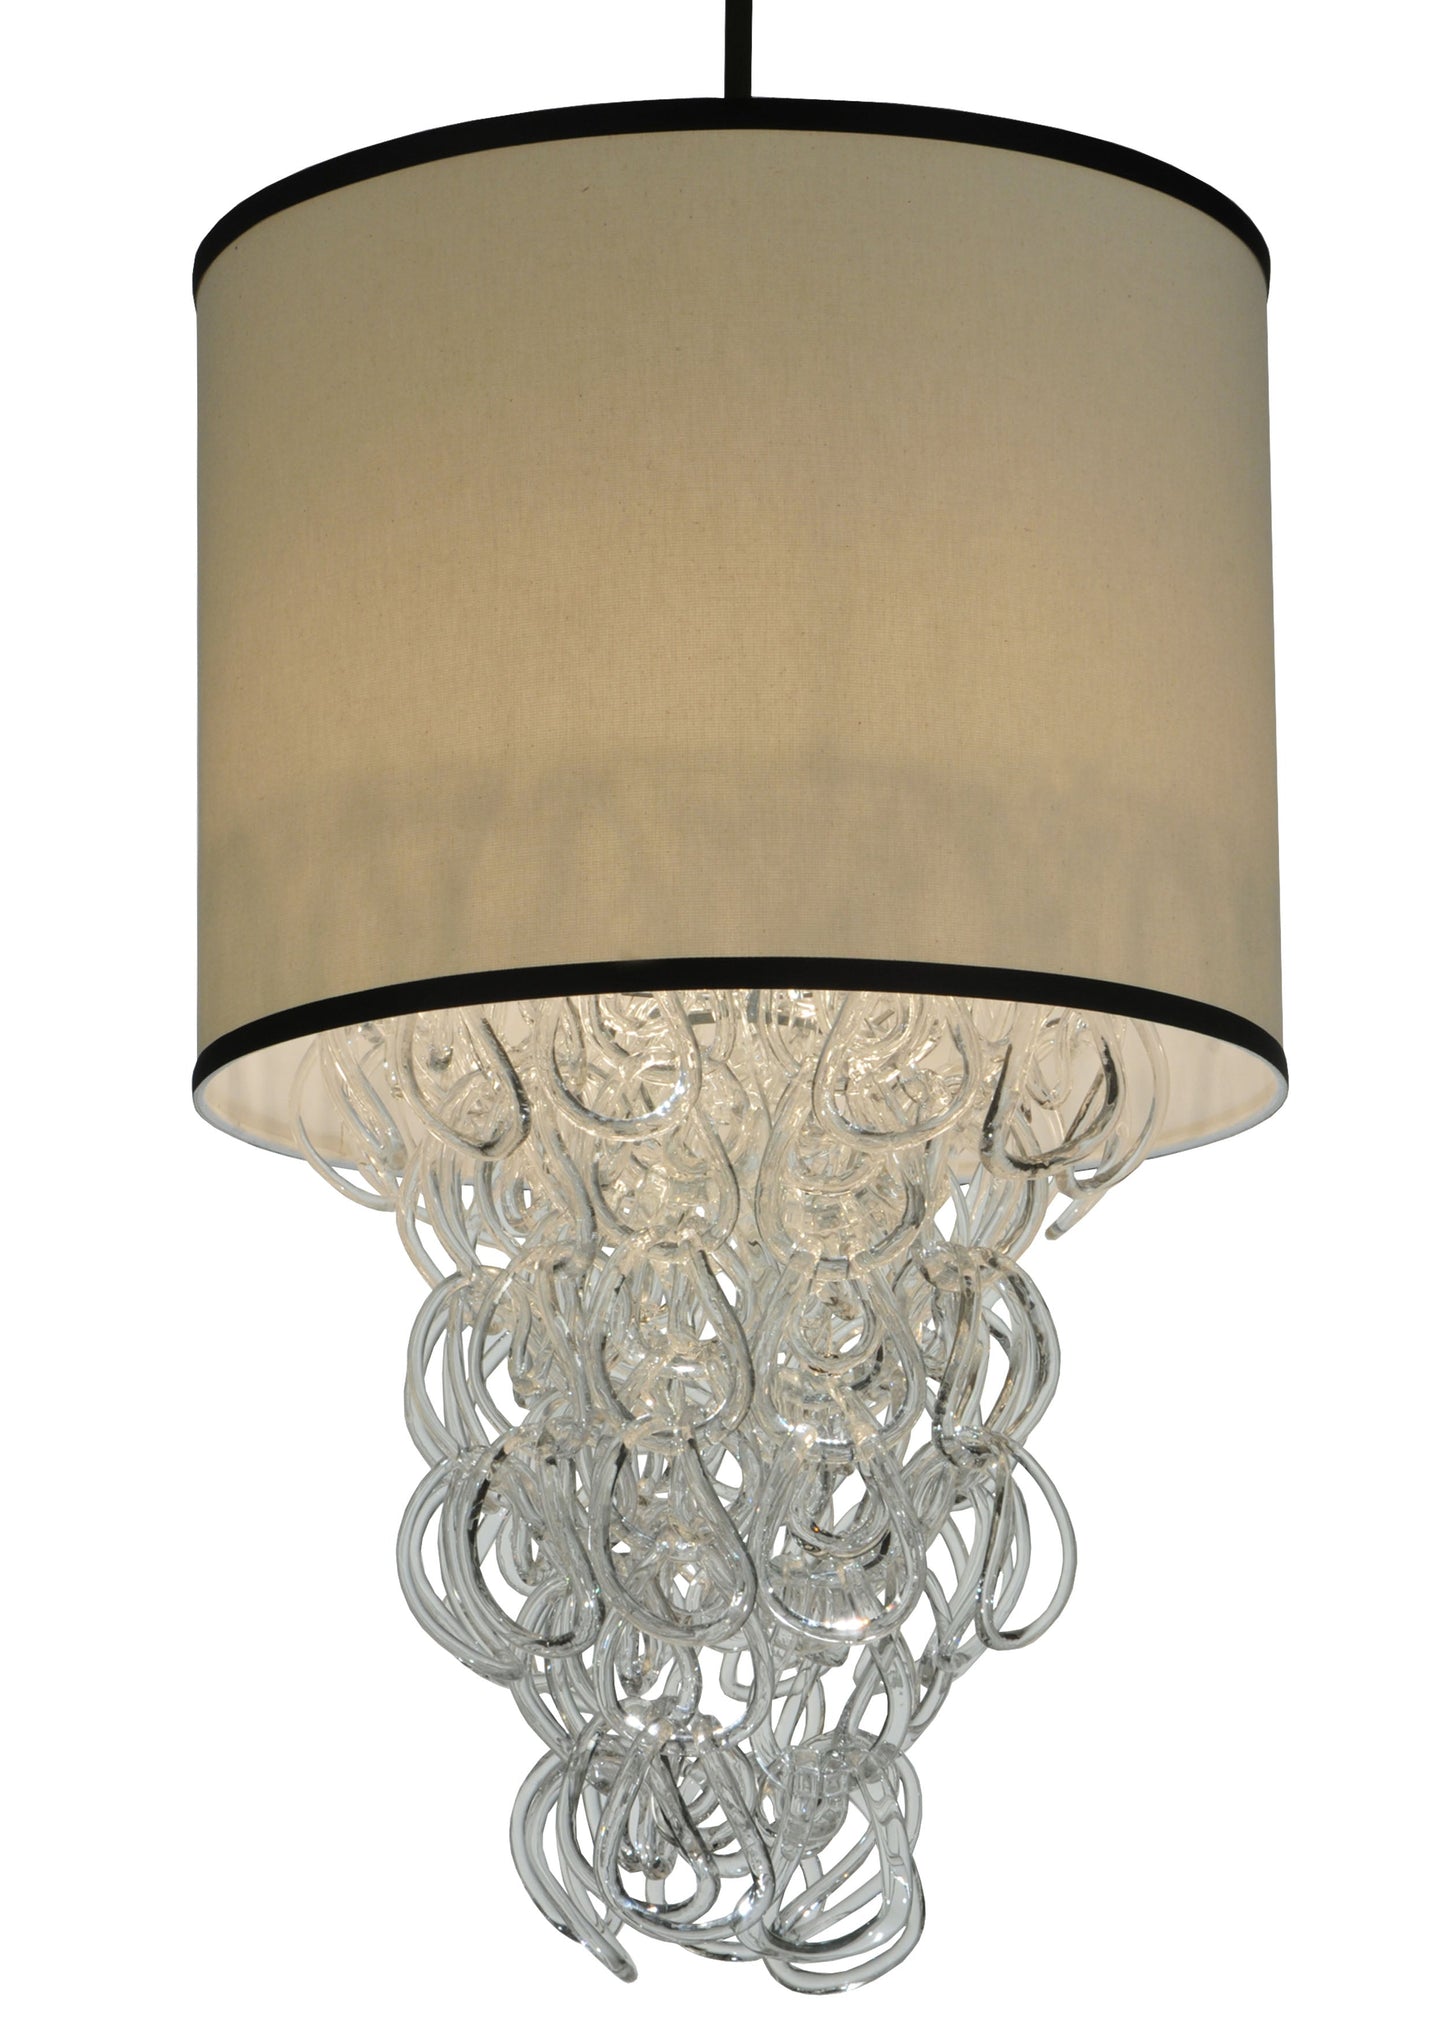 19" Lucy Pendant by 2nd Ave Lighting